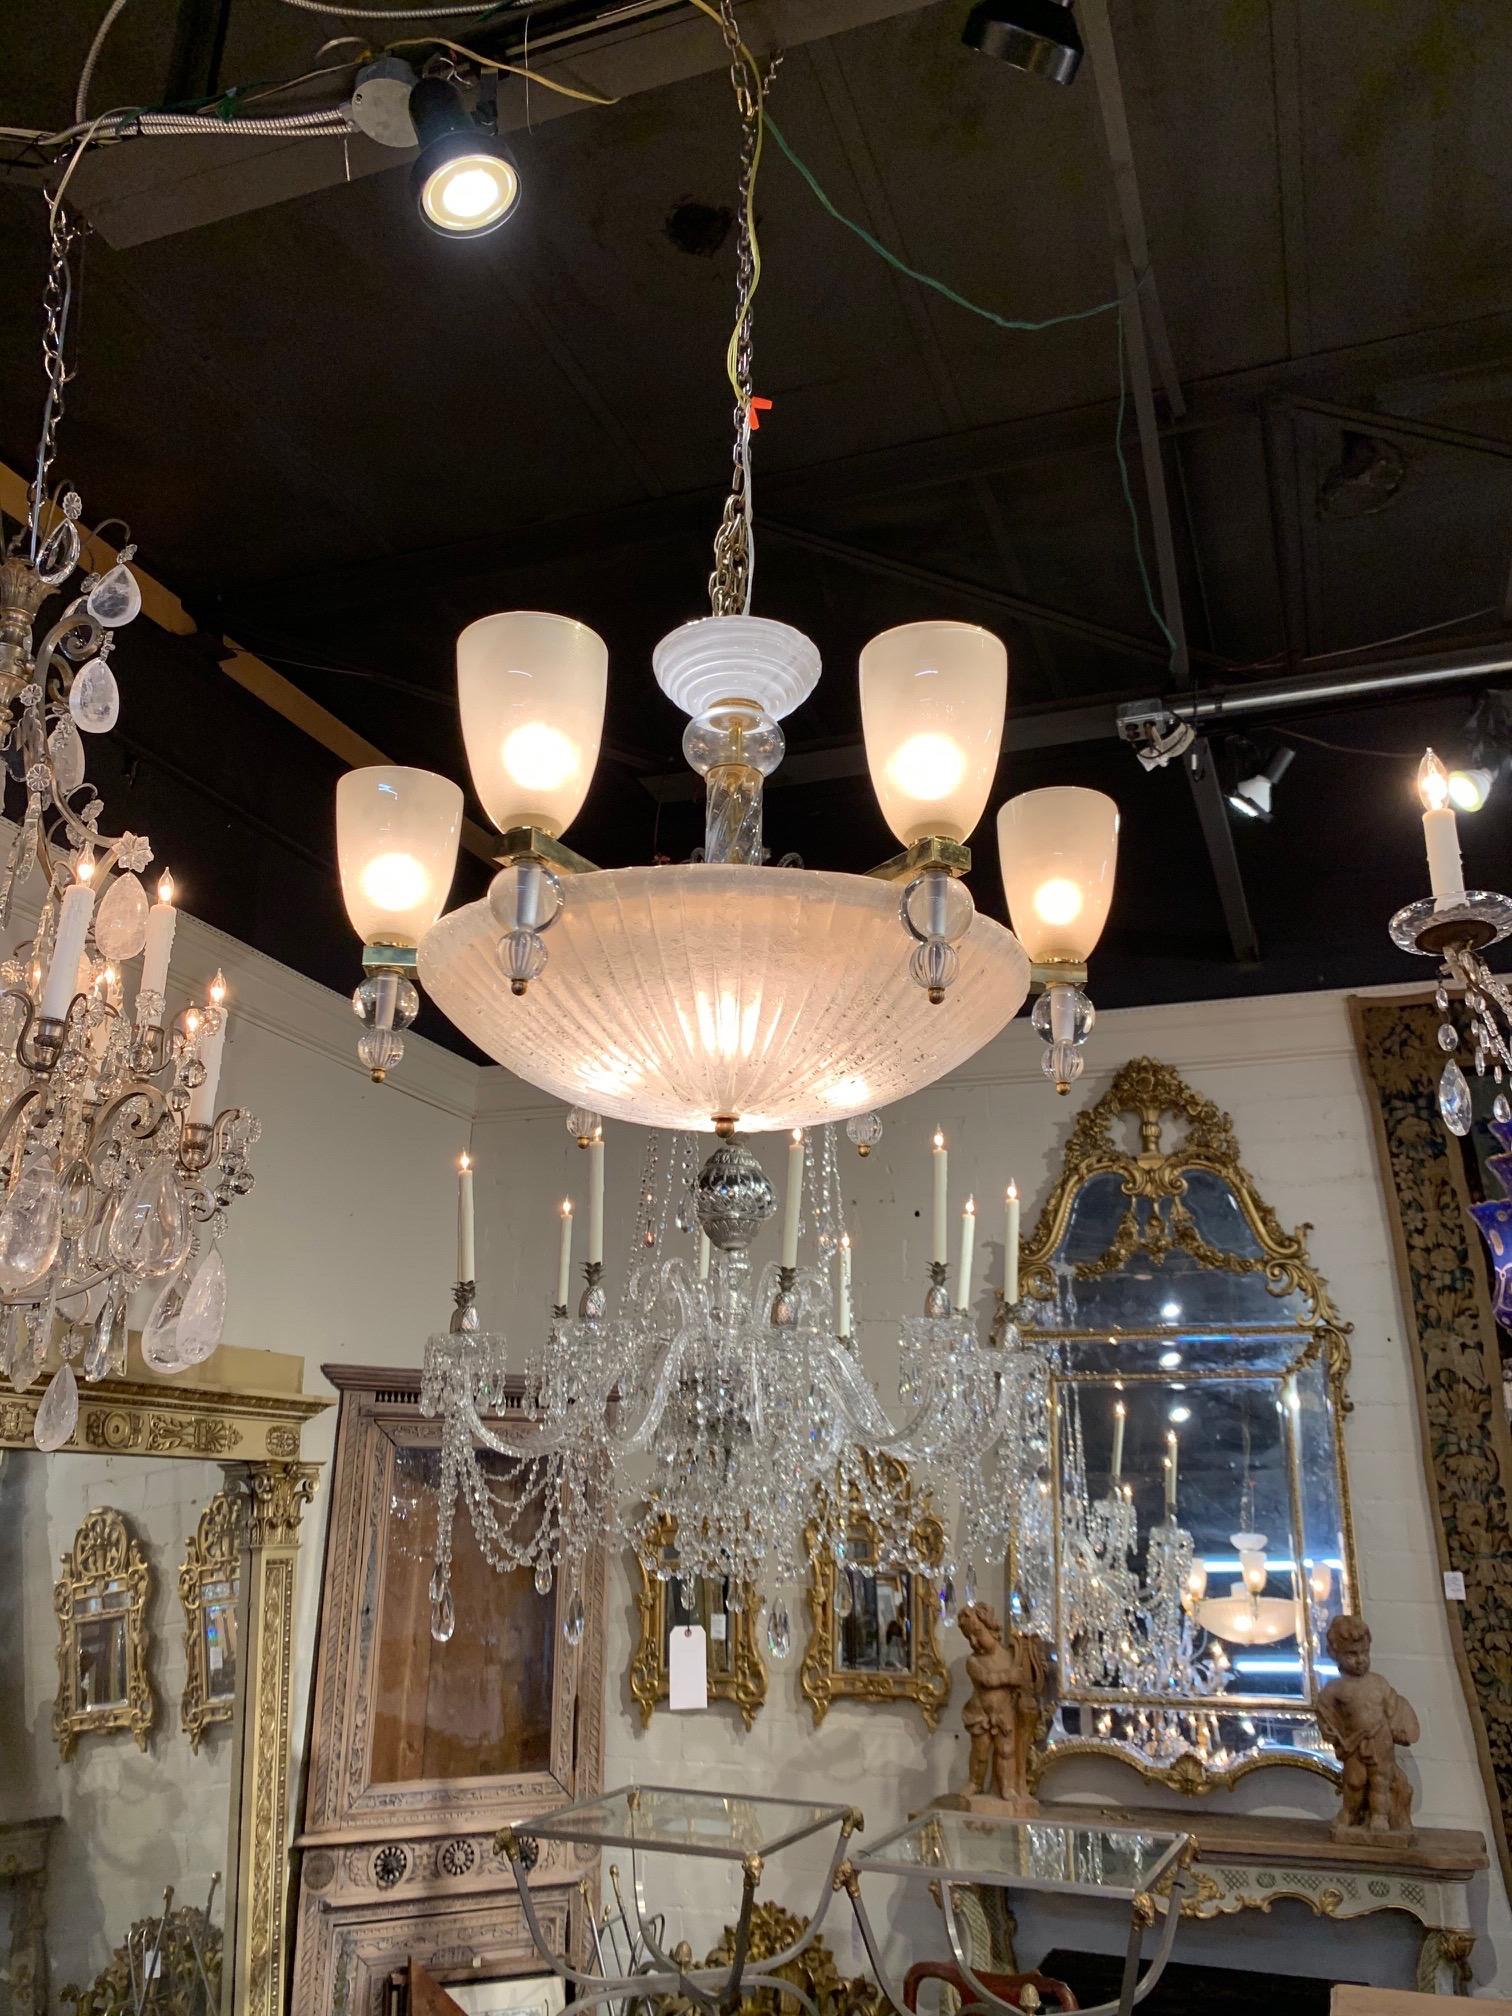 Exquisite modern Murano glass 6-arm chandelier. Beautiful texture on the glass bowl. And the each arm is adorned with a variety of colored and clear glass. A true work of art!